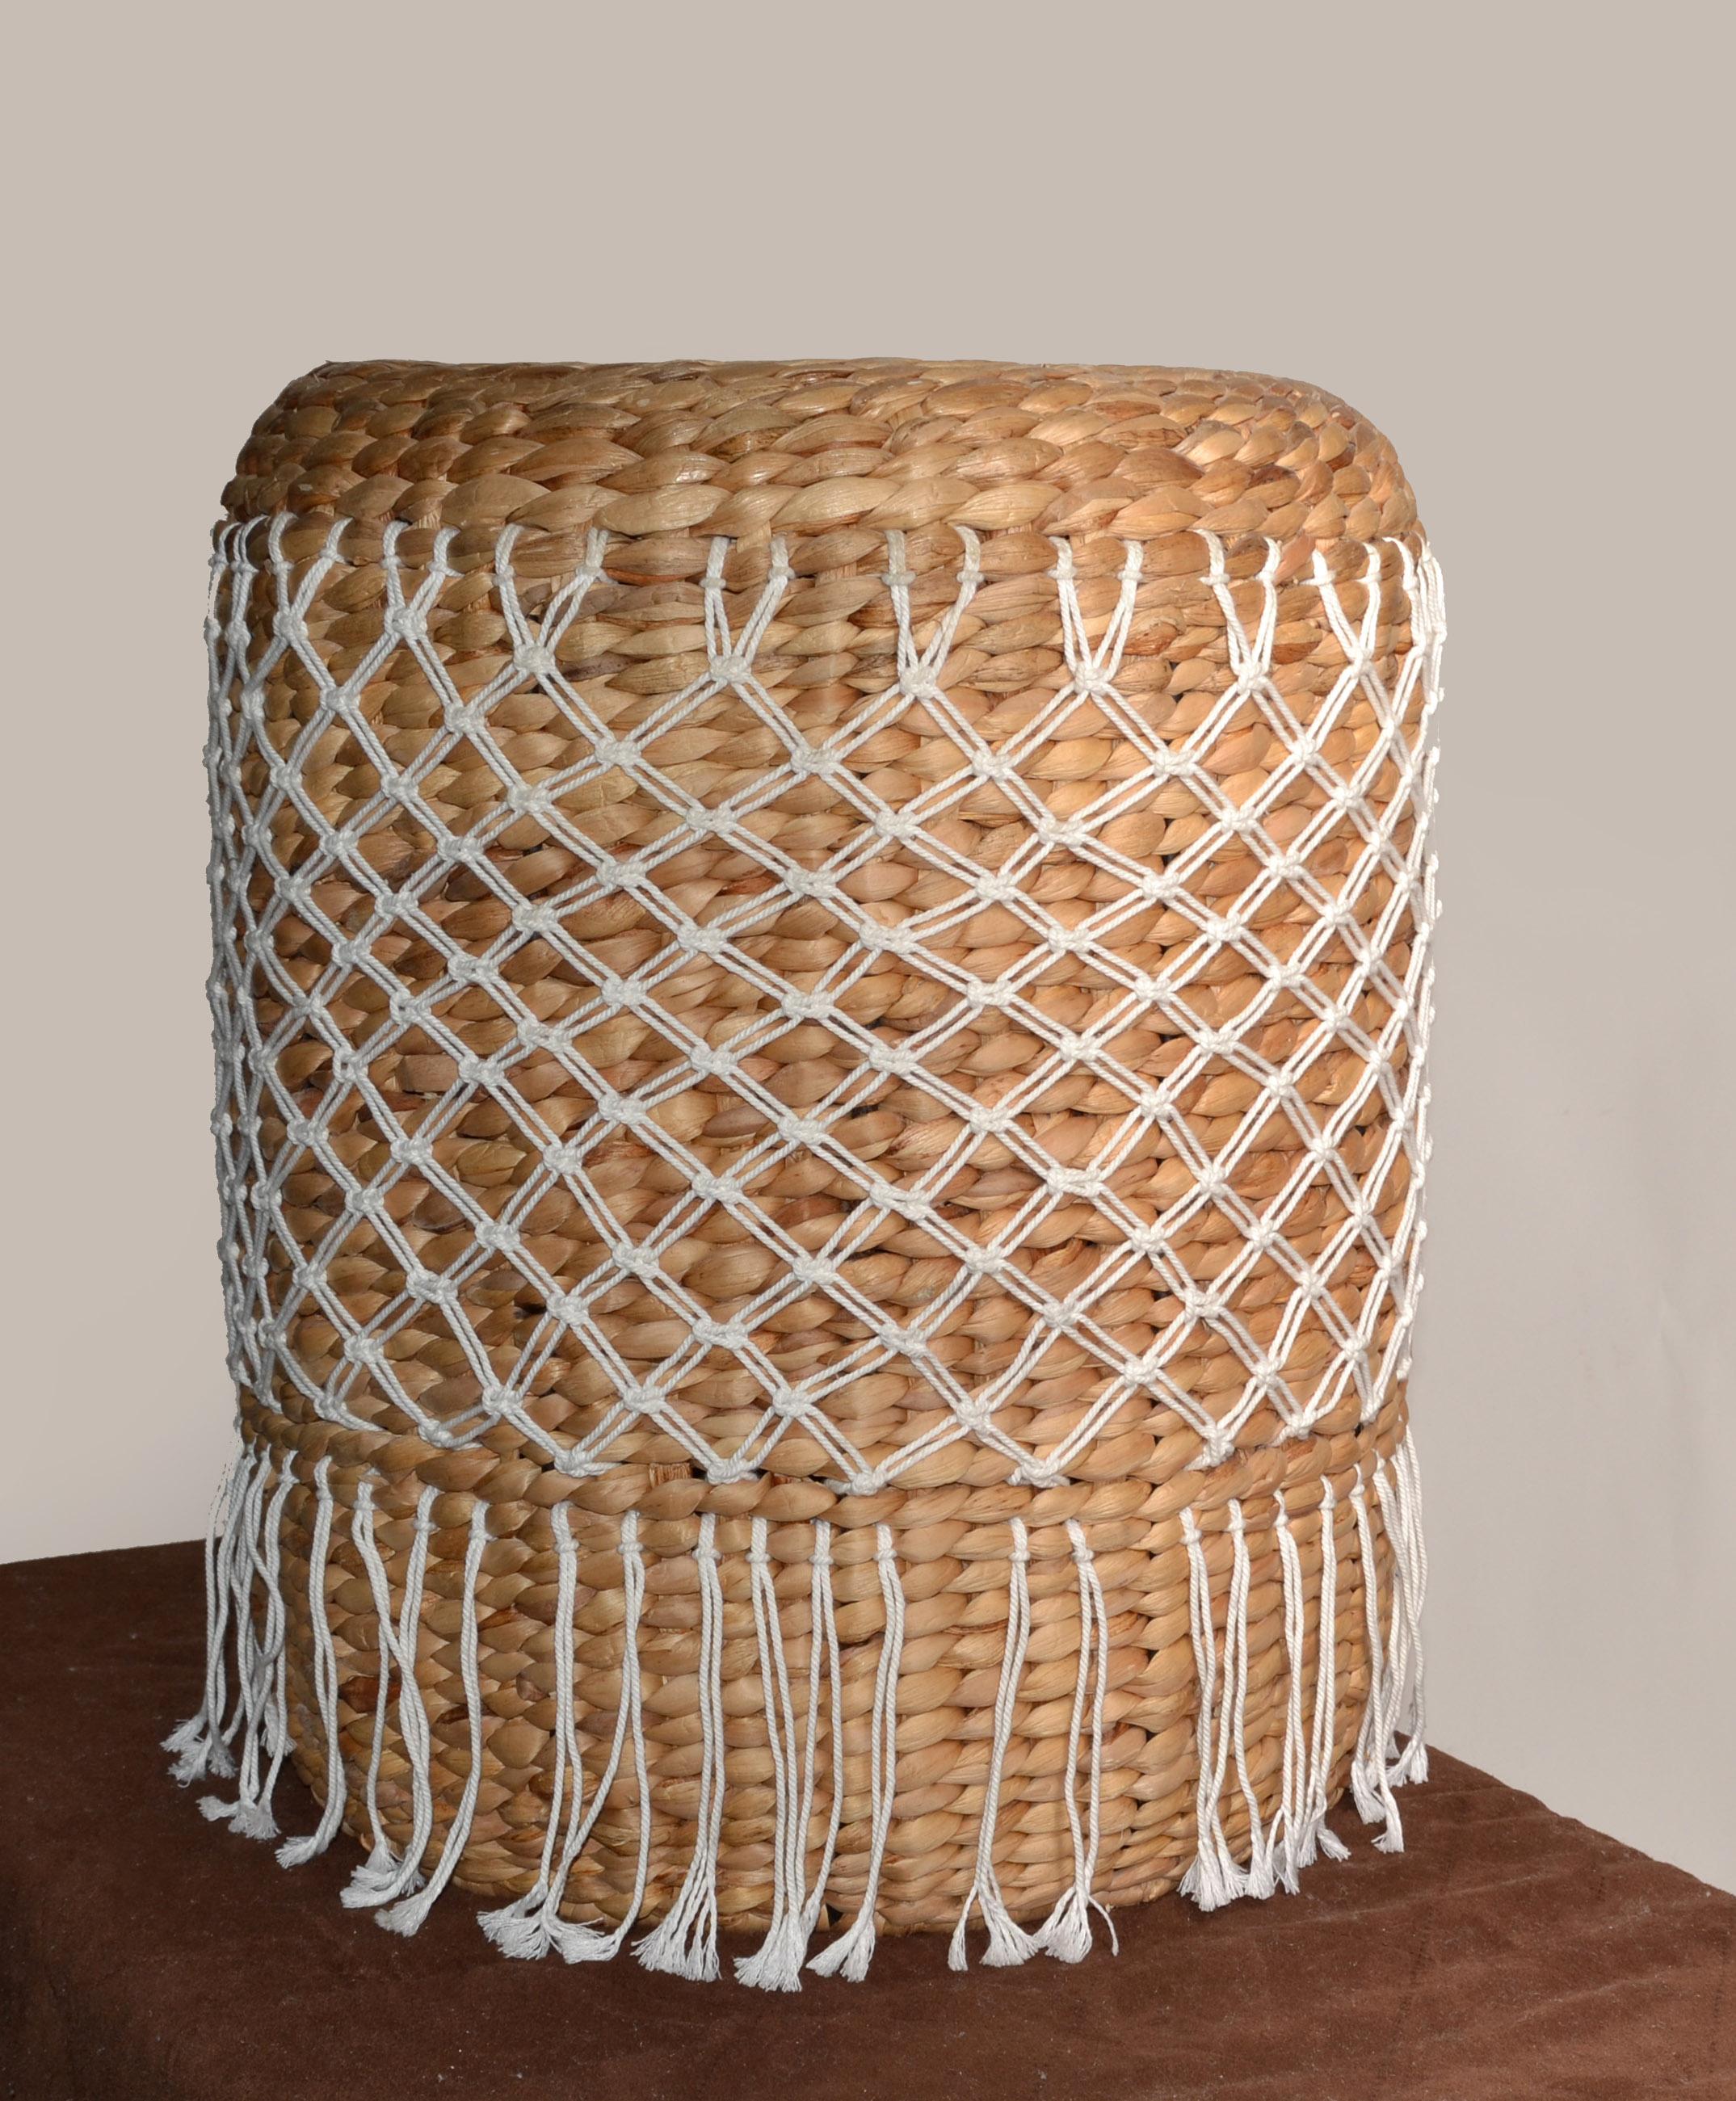 Reminiscent of exotic travels, the Apache Stool features a solid rattan frame supported by steel cross Top with water hyacinth webbing and cotton rope knot decor. 
Water hyacinth is a beautiful natural textural material. It is a fast-growing,